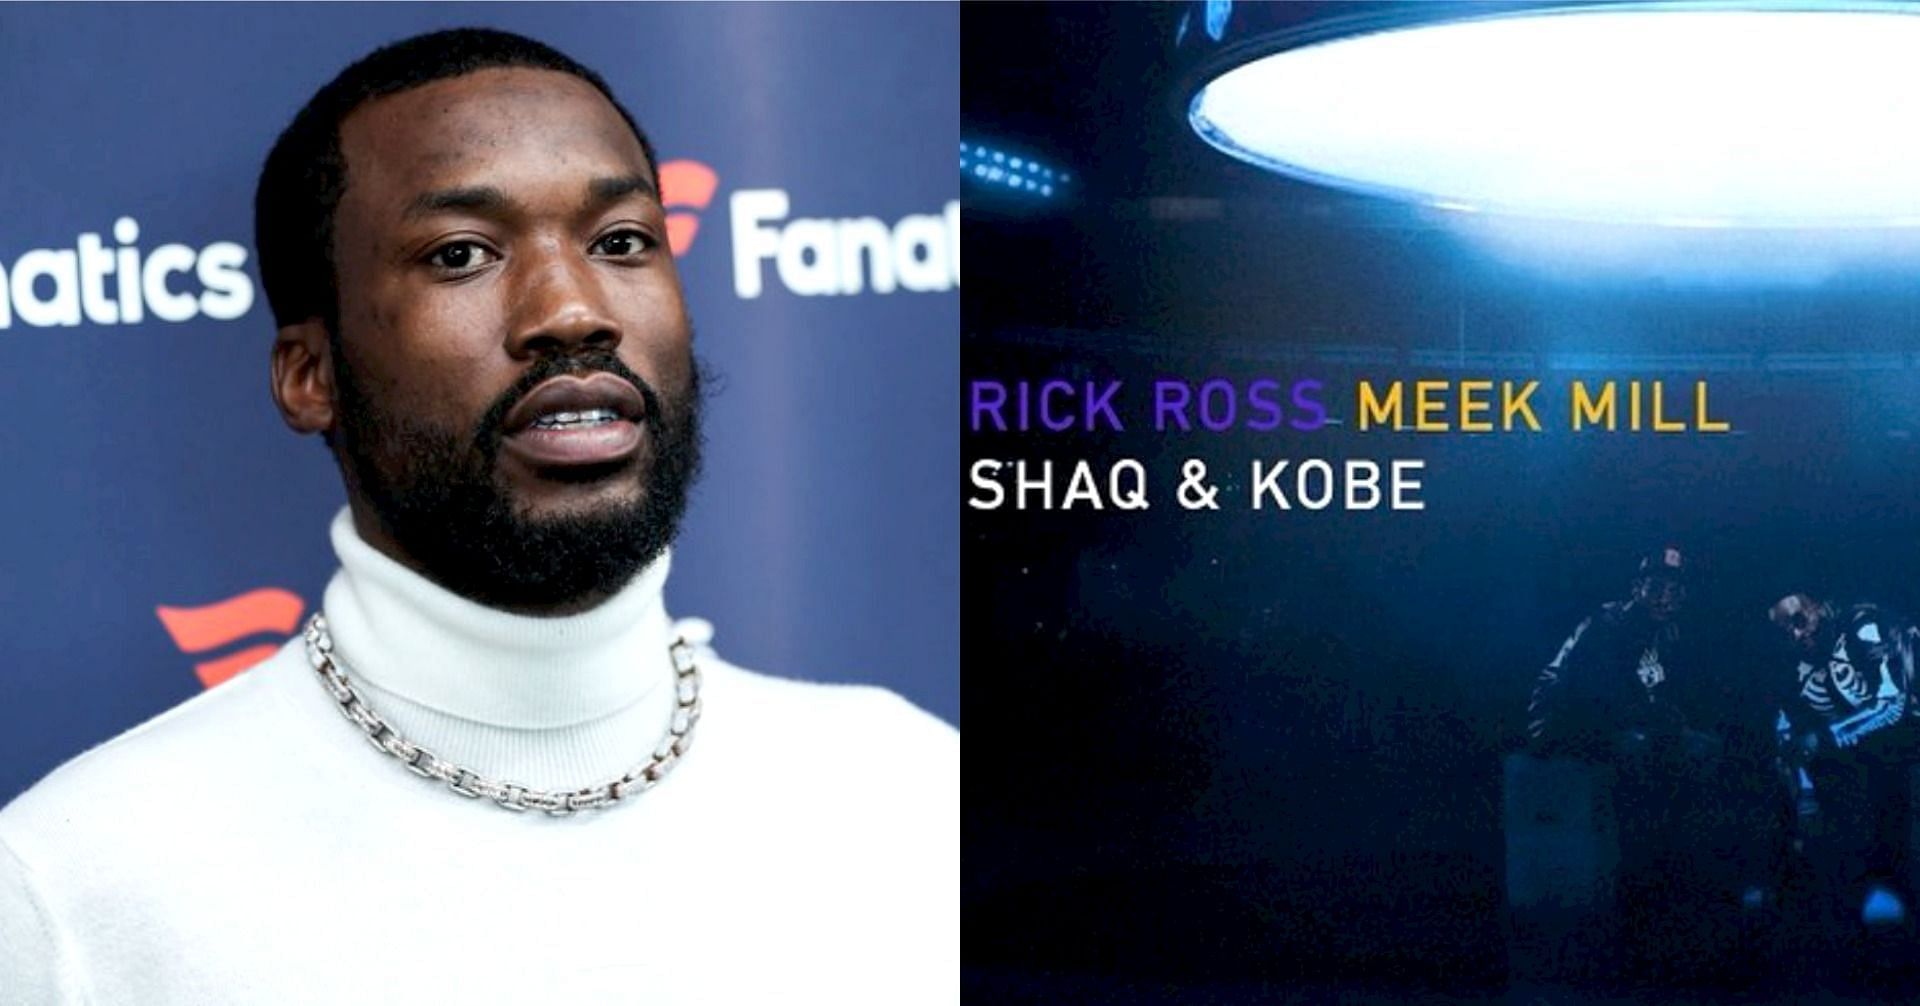 Rapper Meek Mill and the artwork for his upcoming Shaquille O&rsquo;Neal and Kobe Bryant-themed &ldquo;Shaq &amp; Kobe&rdquo; collab with Rick Ross